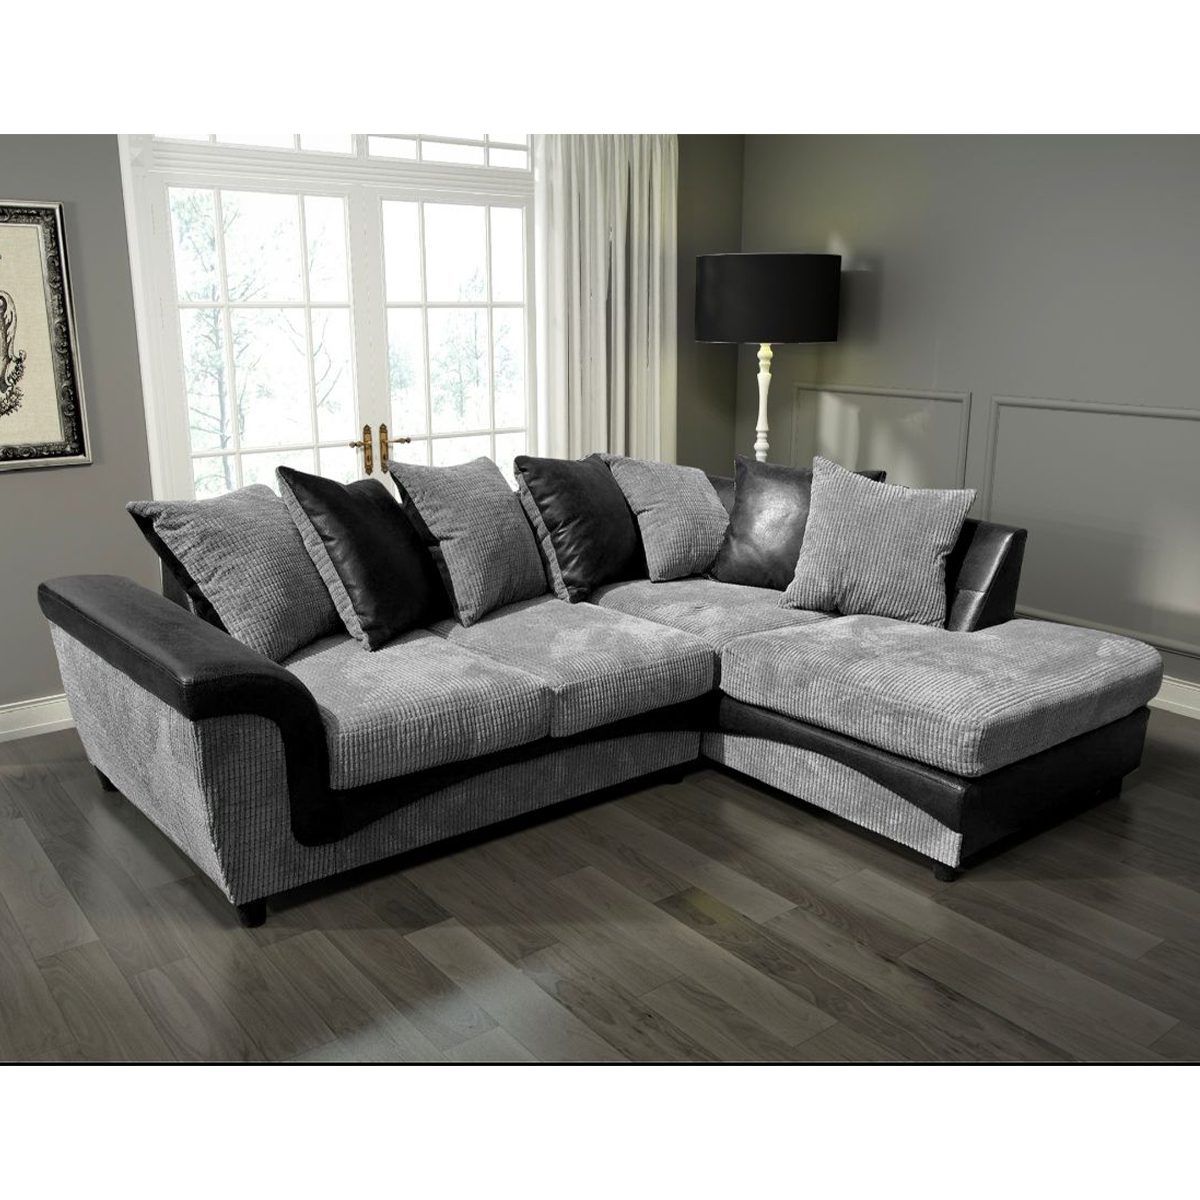 Aston Black And Grey Fabric Corner Sofa – The Online Sofa Shop Within Right Facing Black Sofas (View 12 of 15)